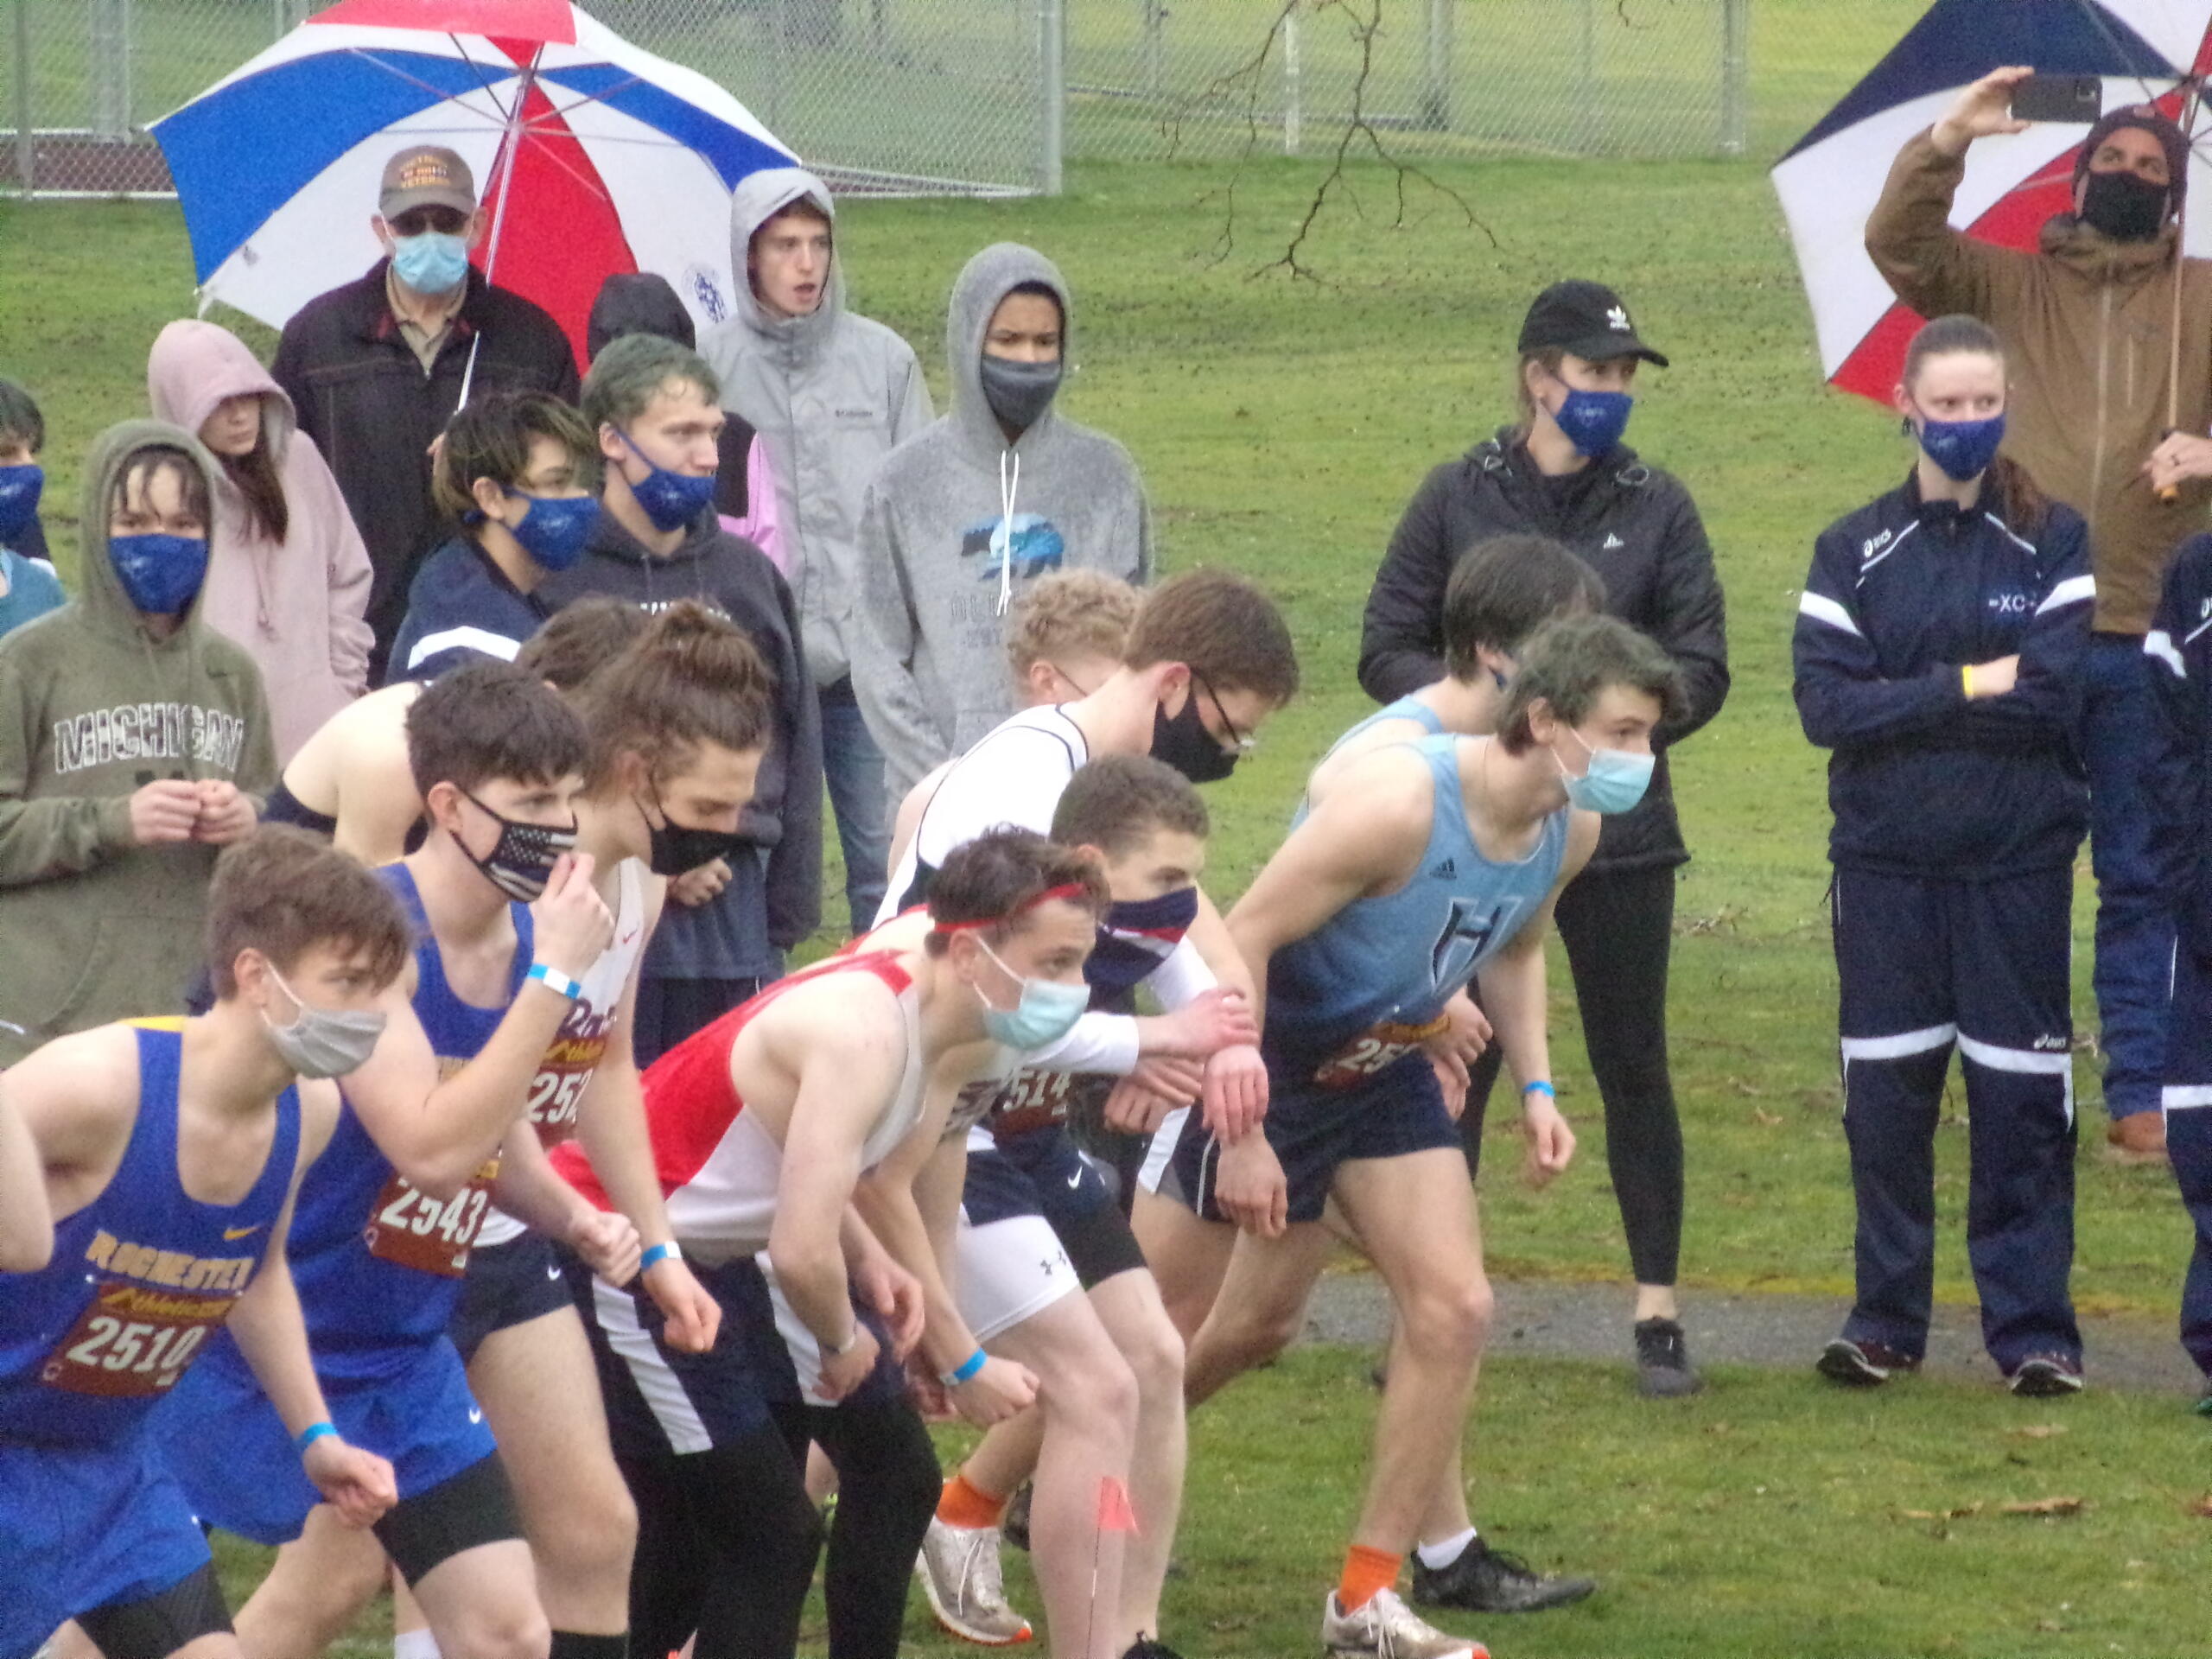 Runners await the starter's pistol at the start of the boys race at the 2A district cross country meet at Hudson's Bay High School on Thursday, March 18, 2021 (Tim Martinez/The Columbian)